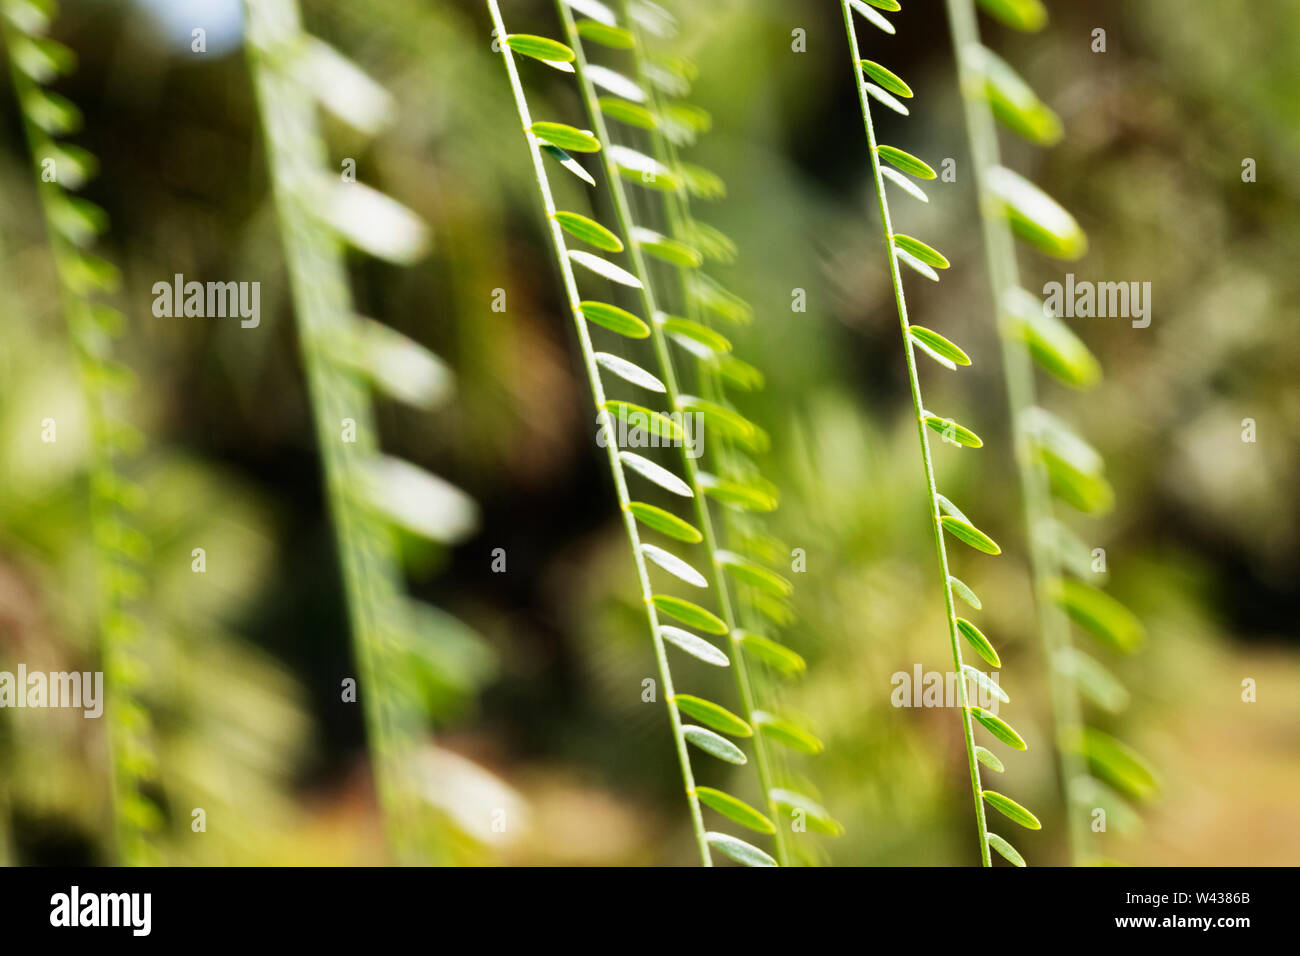 Long branches with pendulous leaves of  Jerusalem thorn tree -parkinsonia aculeata or Mexican palo verde -  macro photography Stock Photo